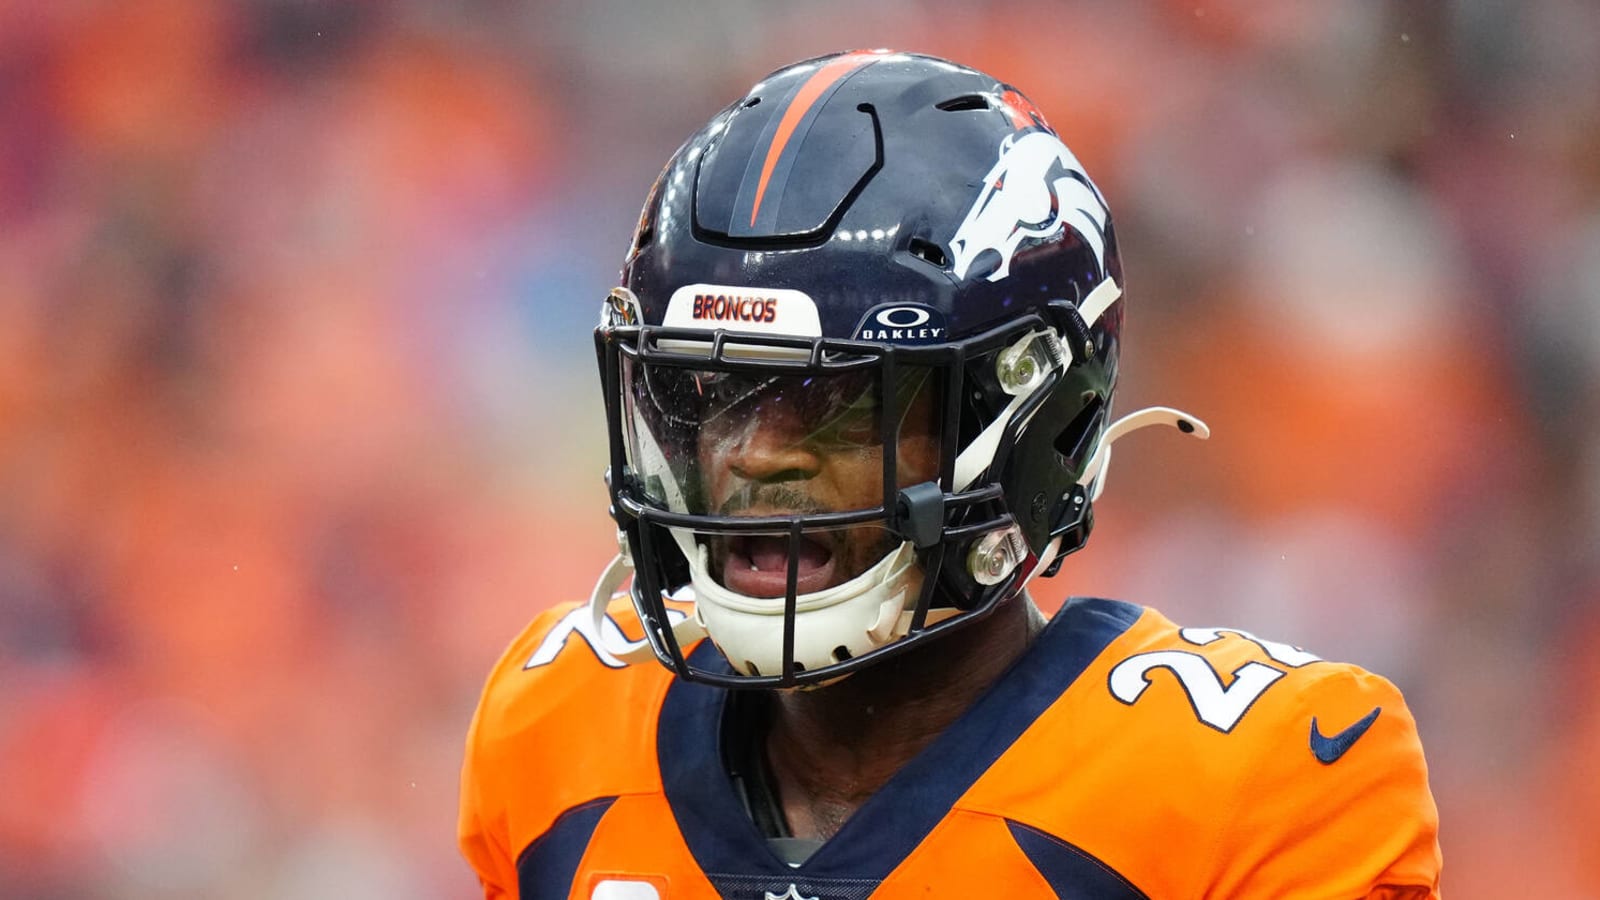 Watch: Broncos' Jackson ejected again, keeps delivering dirty hits